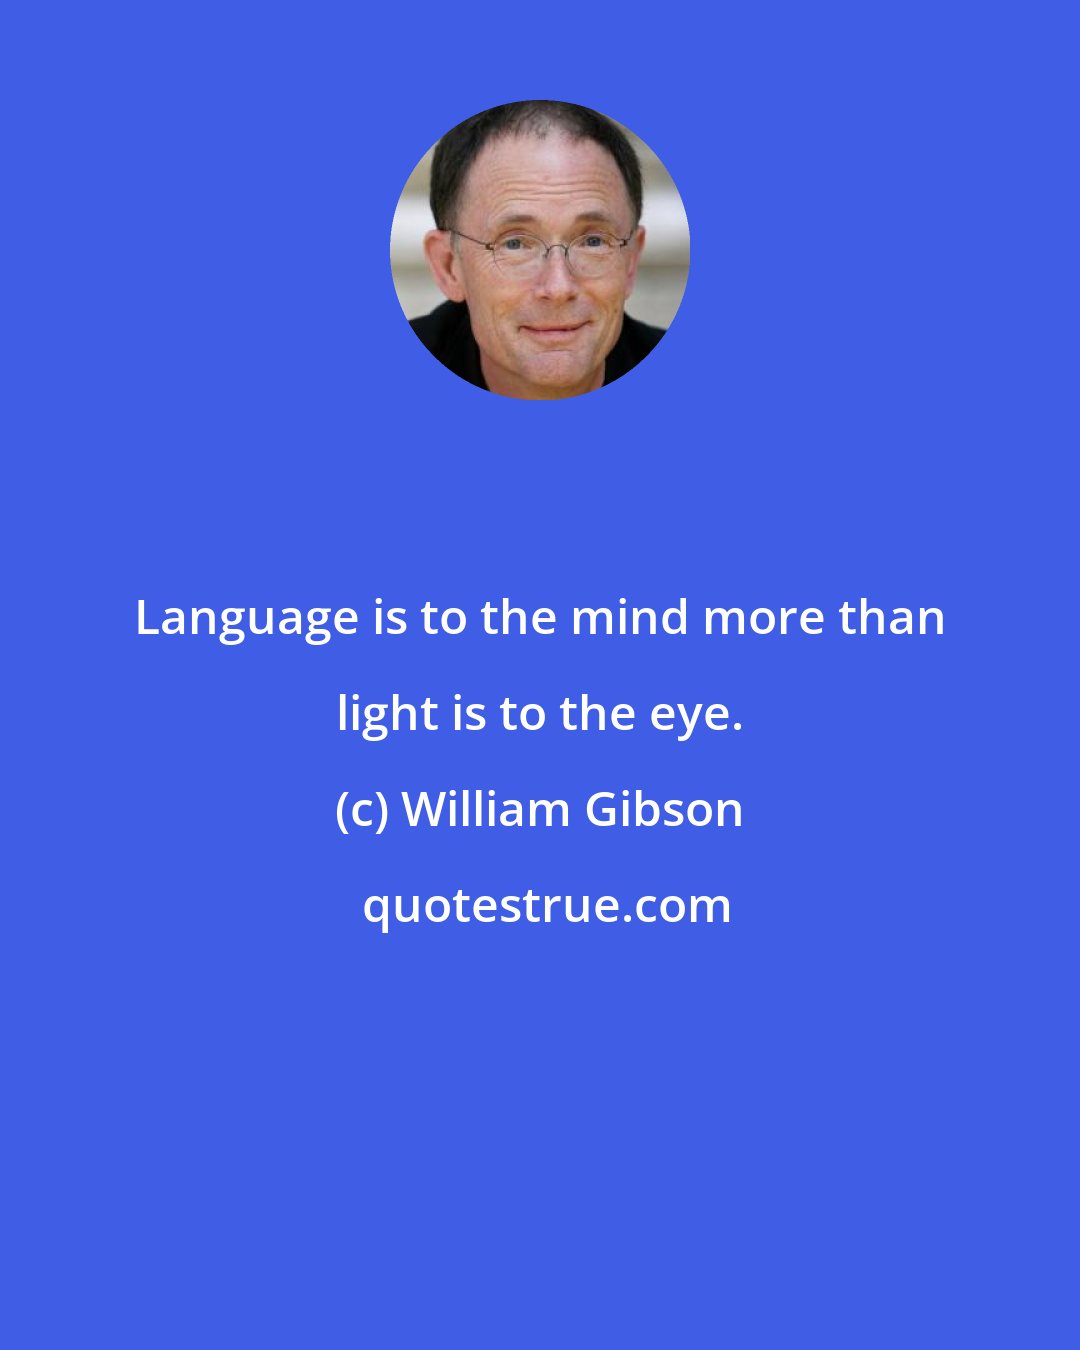 William Gibson: Language is to the mind more than light is to the eye.